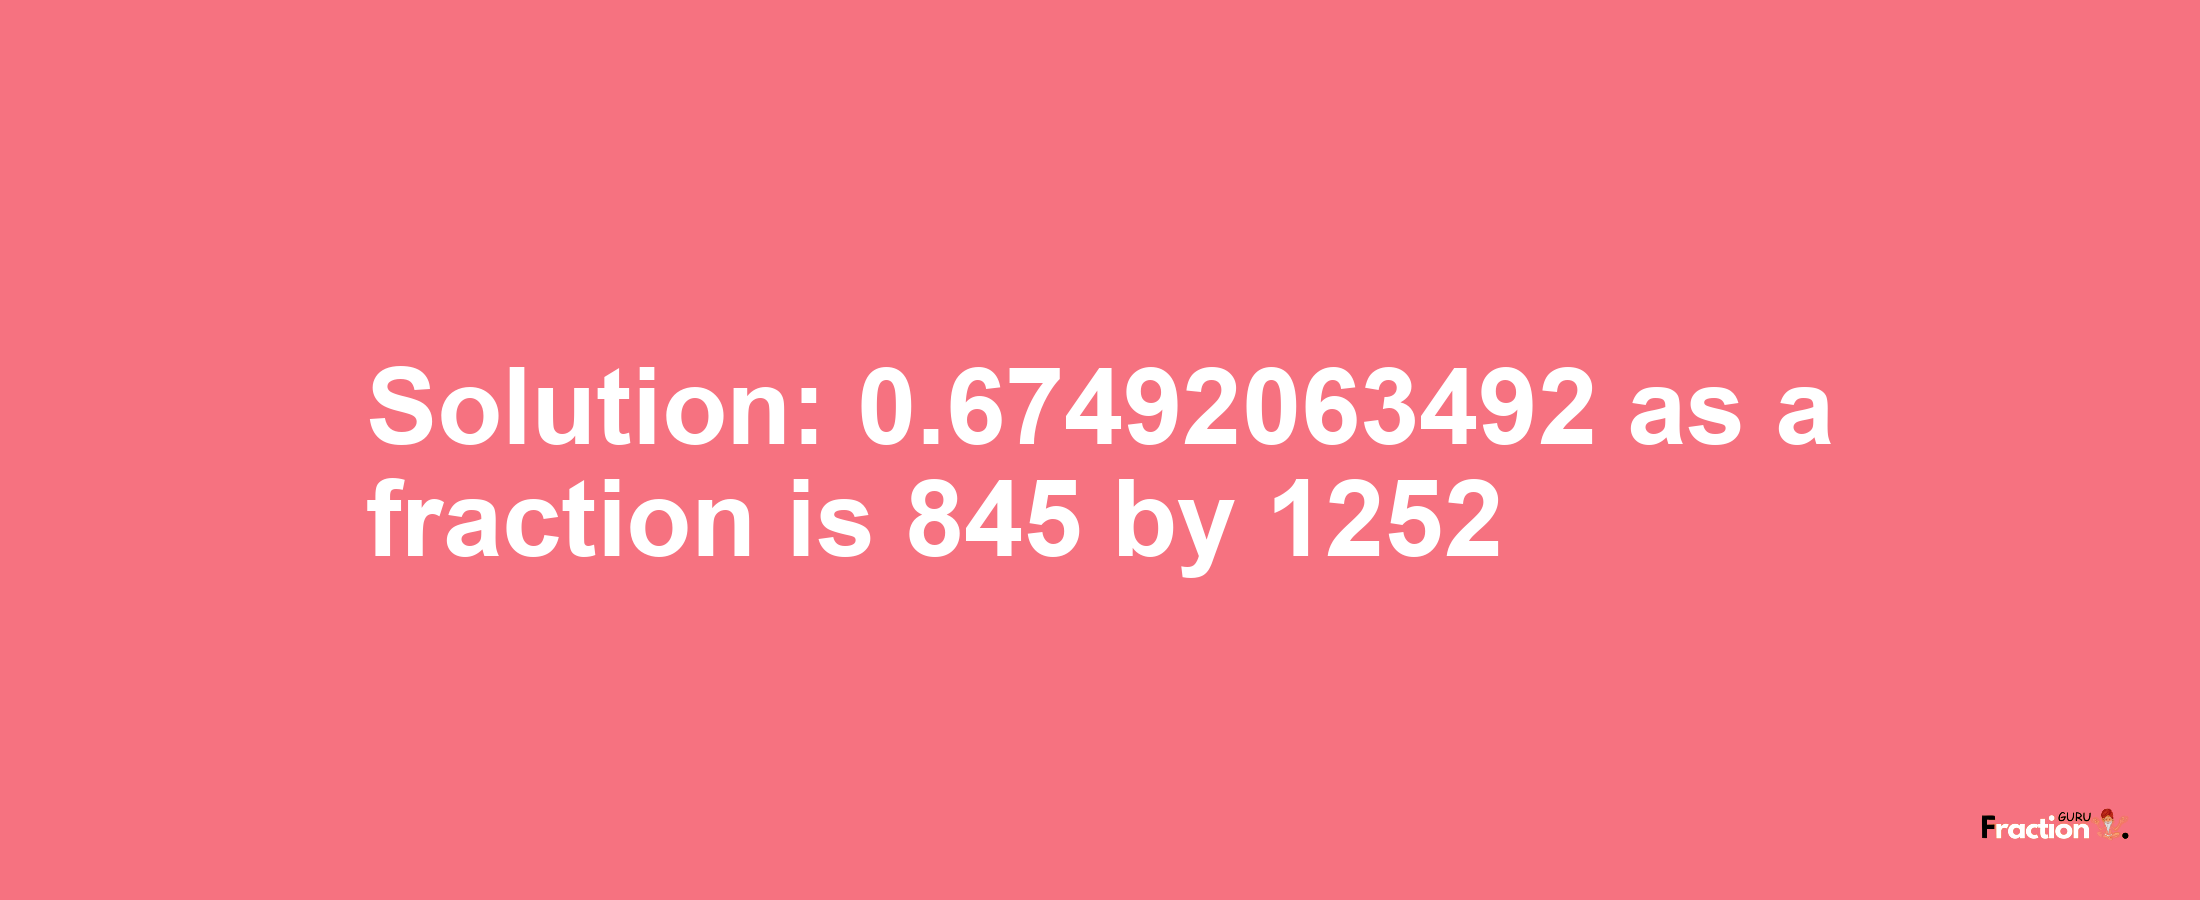 Solution:0.67492063492 as a fraction is 845/1252